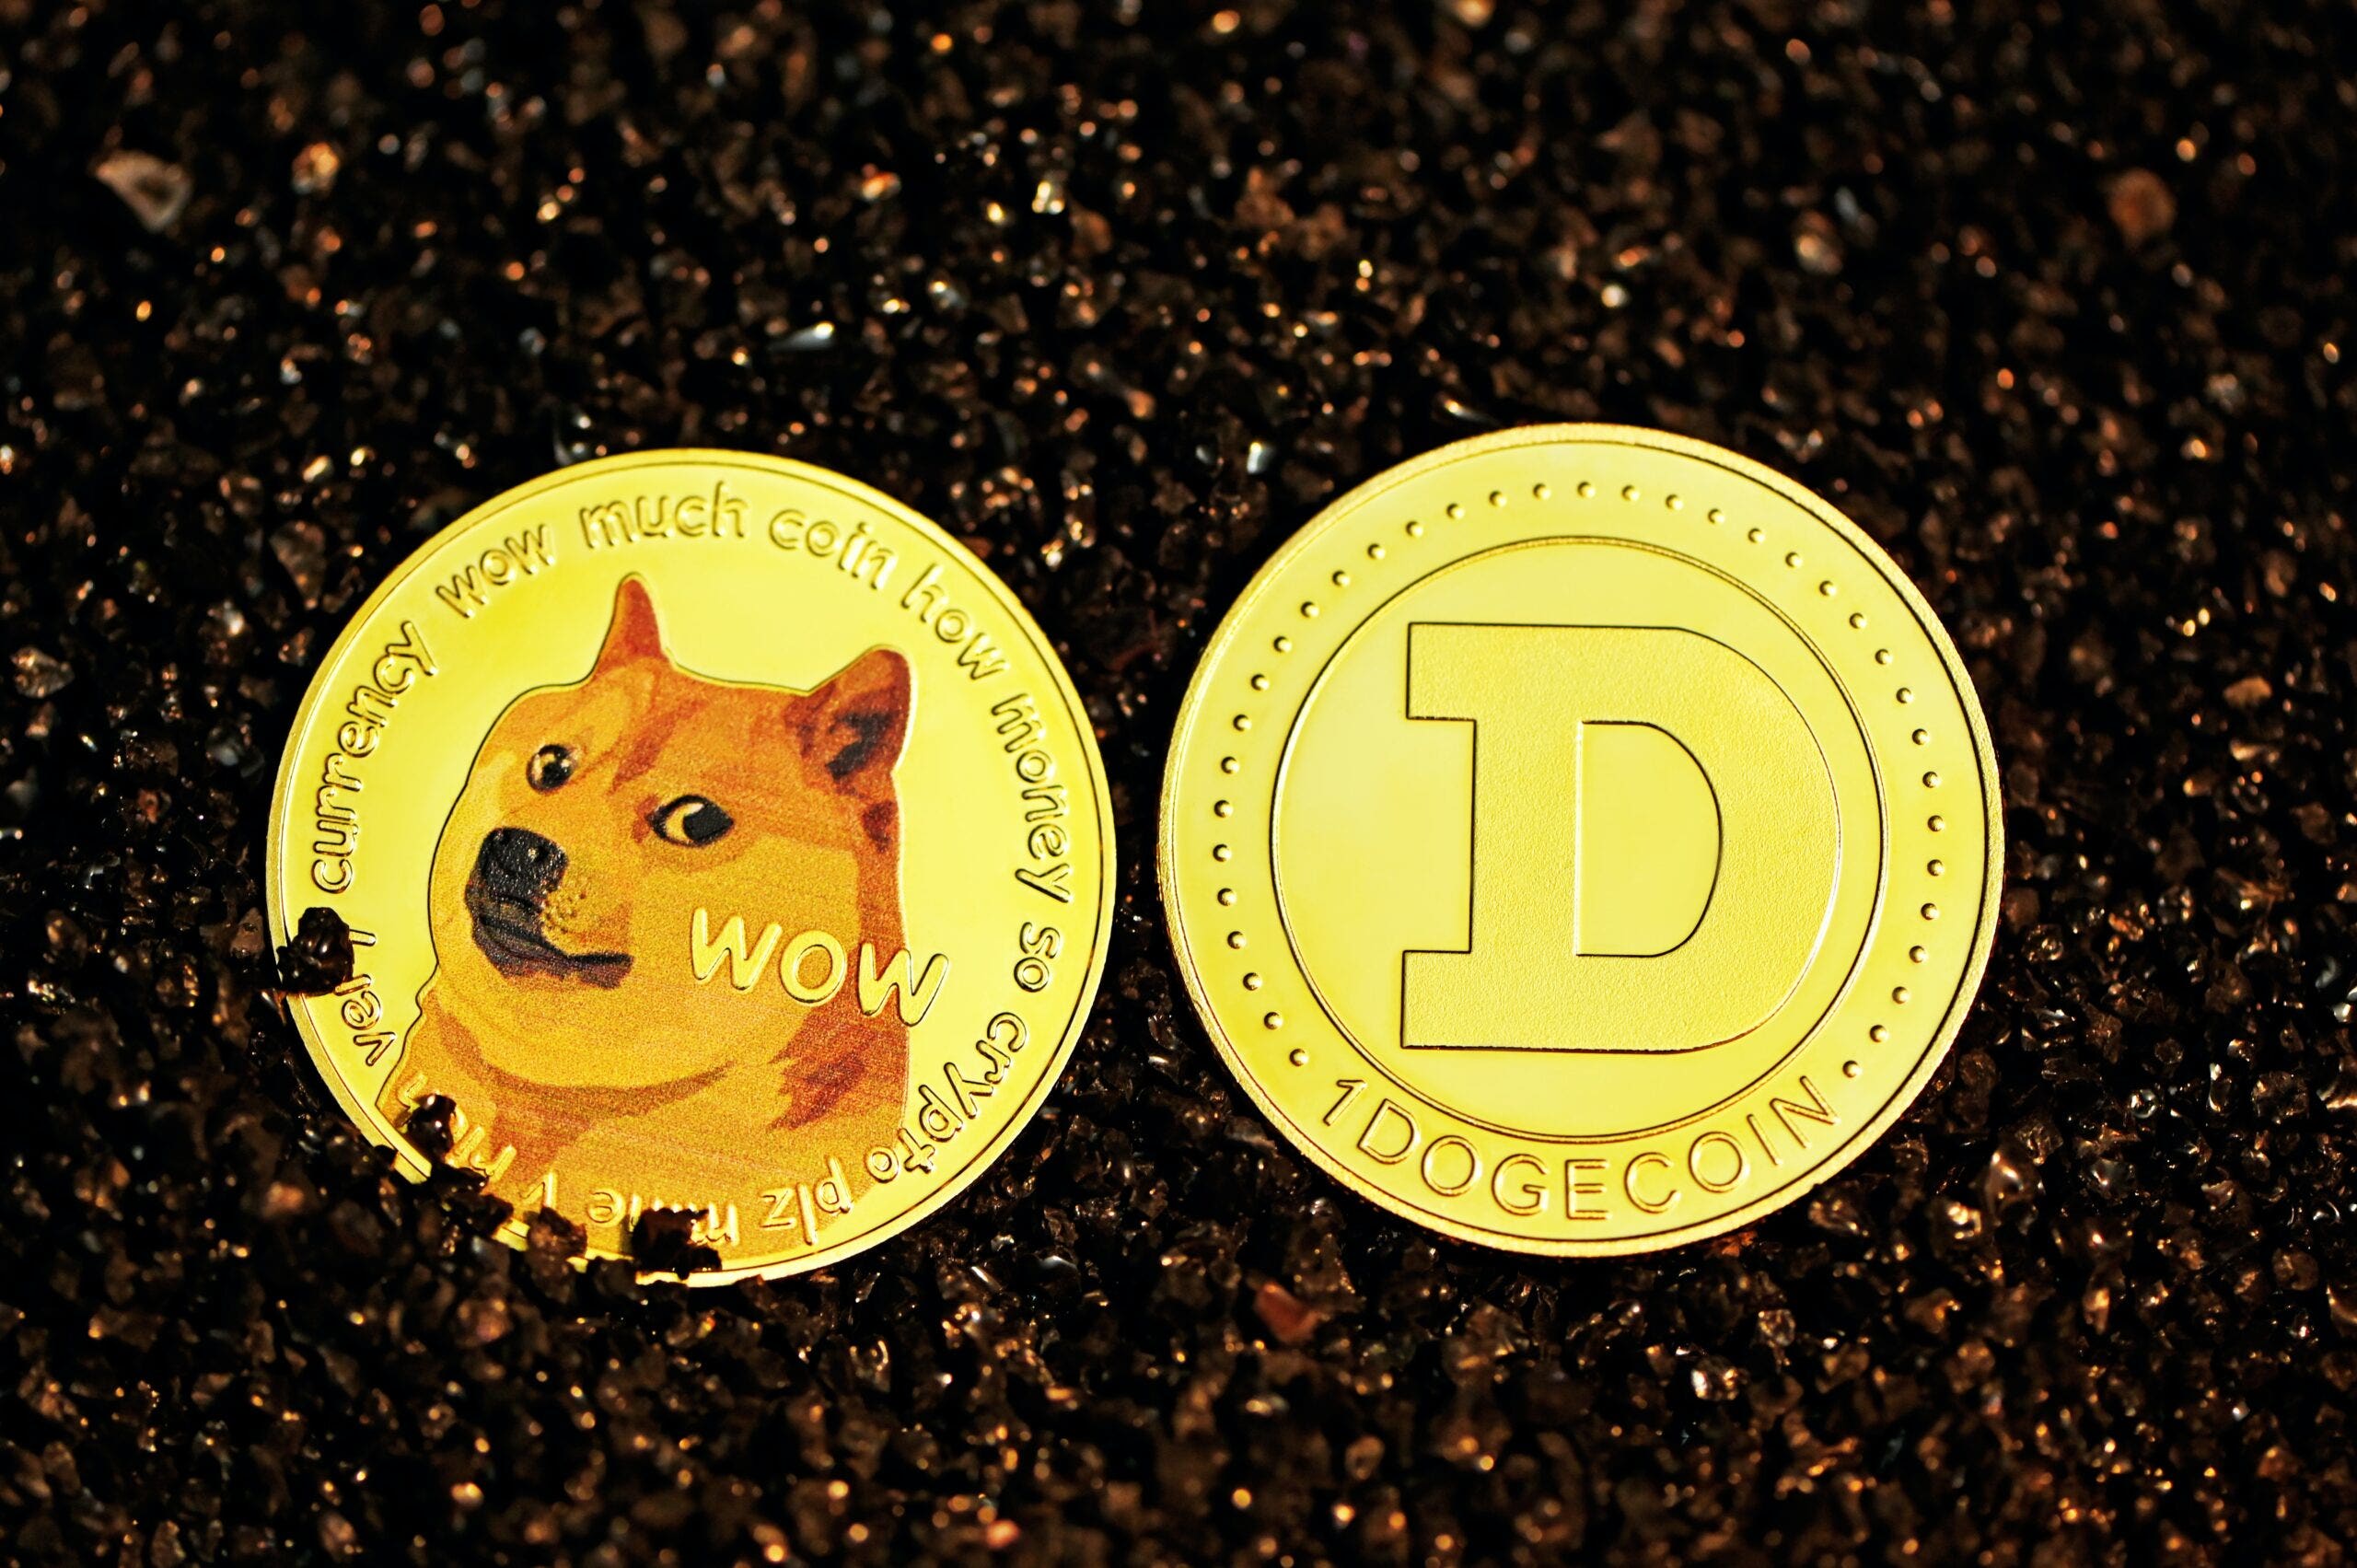 Dogecoin: How to Buy Dogecoin UK - Beginner’s Guide - The Economic Times